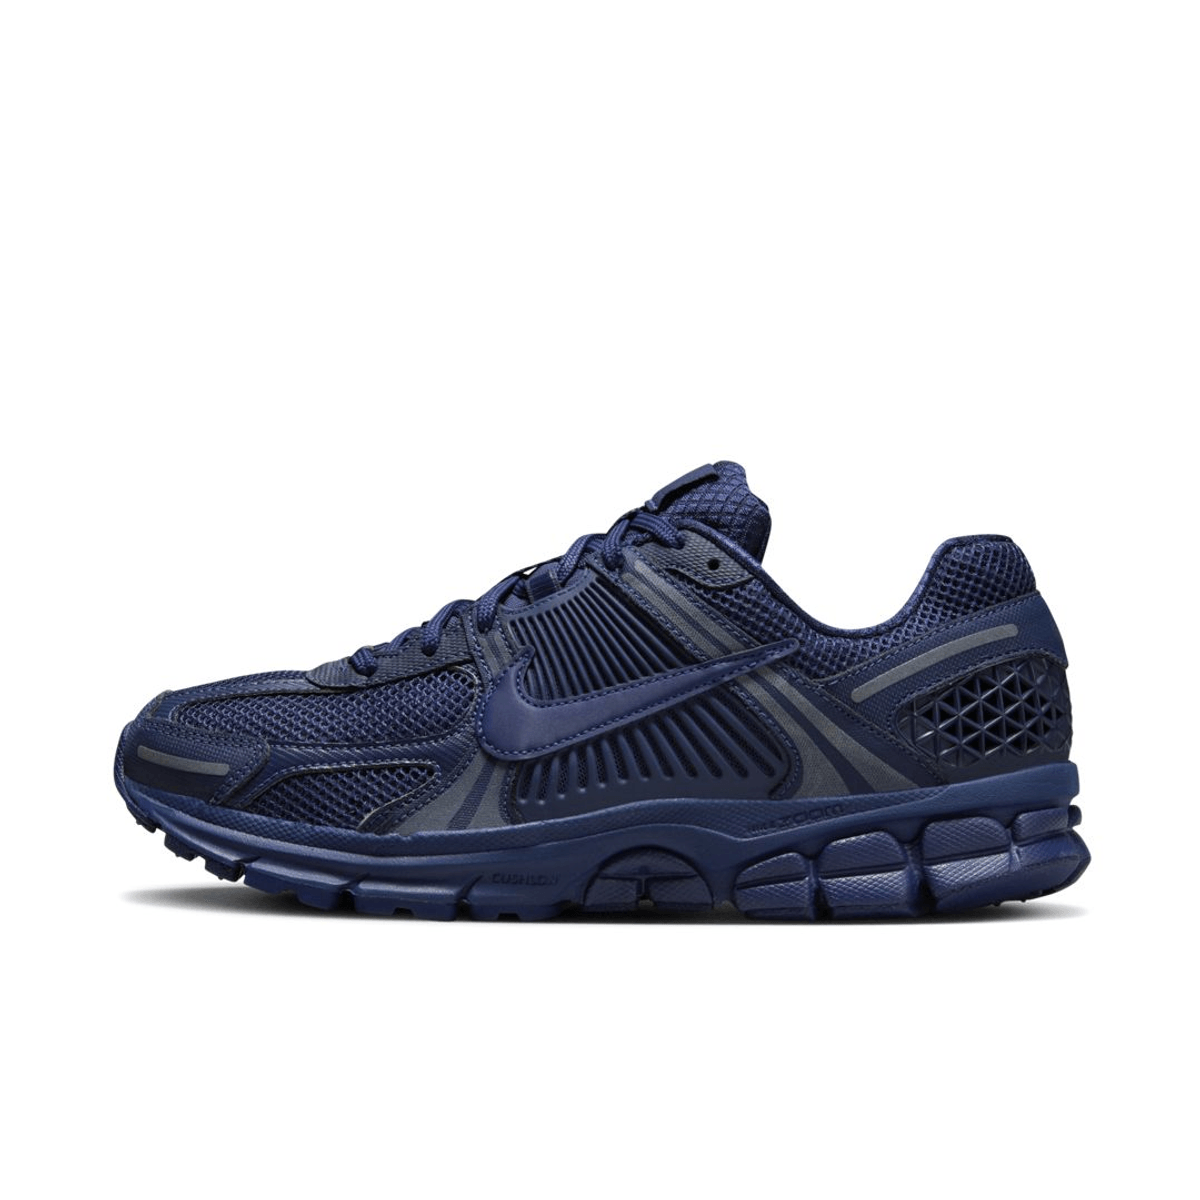 The Nike Zoom Vomero 5 "Midnight Navy" Releases This November